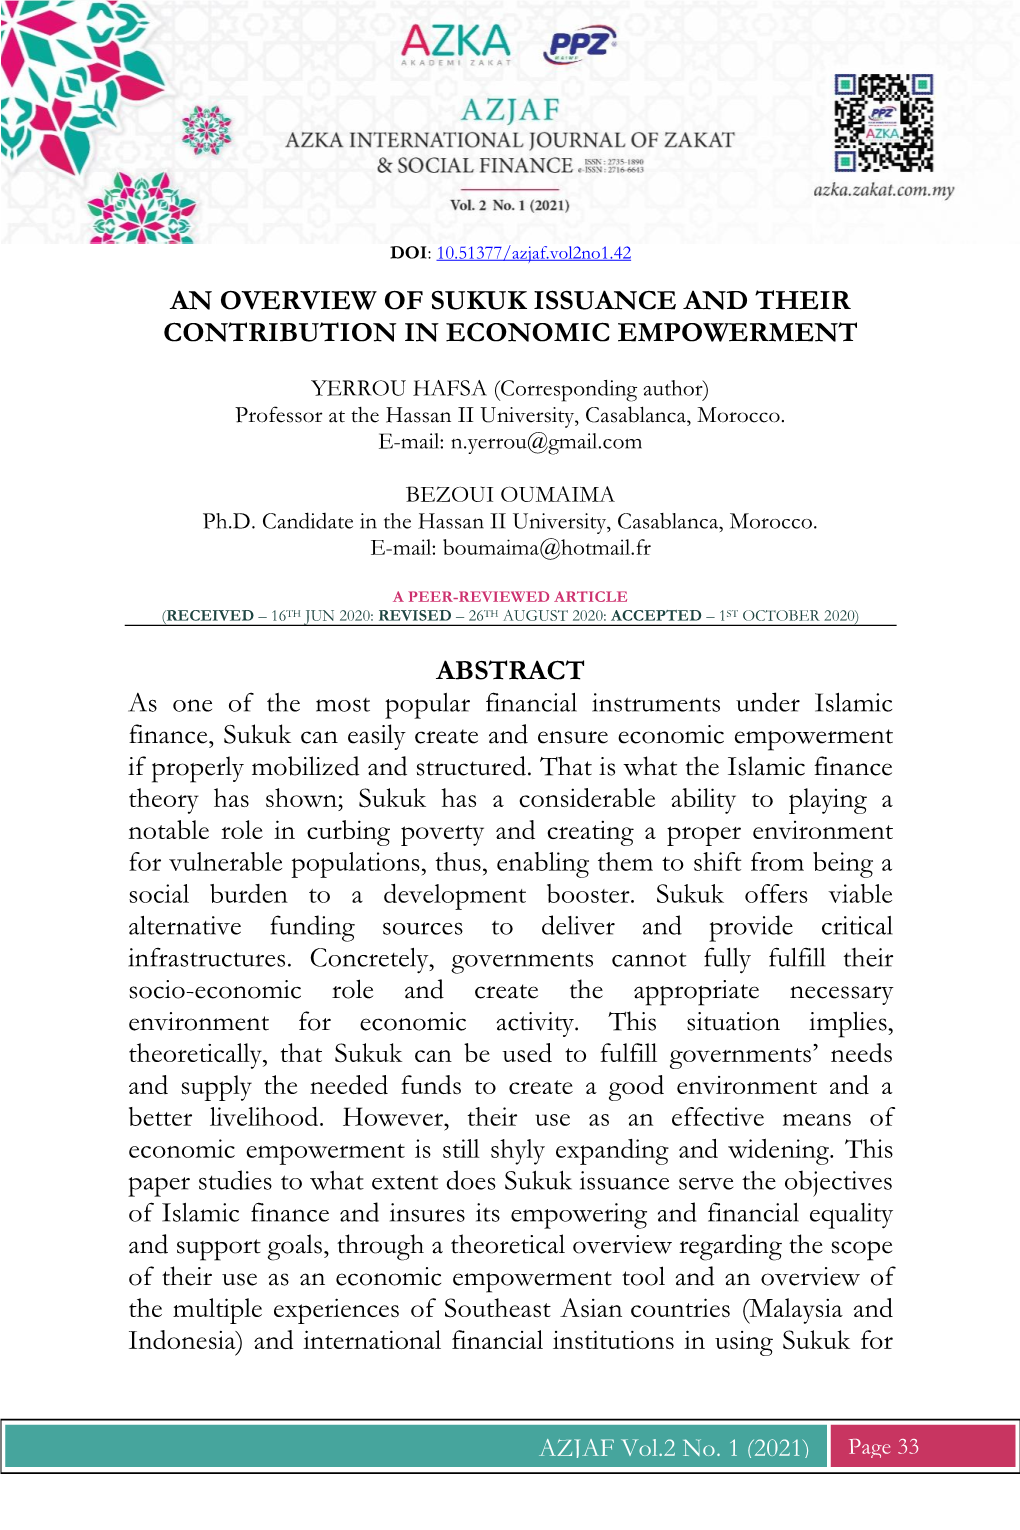 An Overview of Sukuk Issuance and Their Contribution in Economic Empowerment